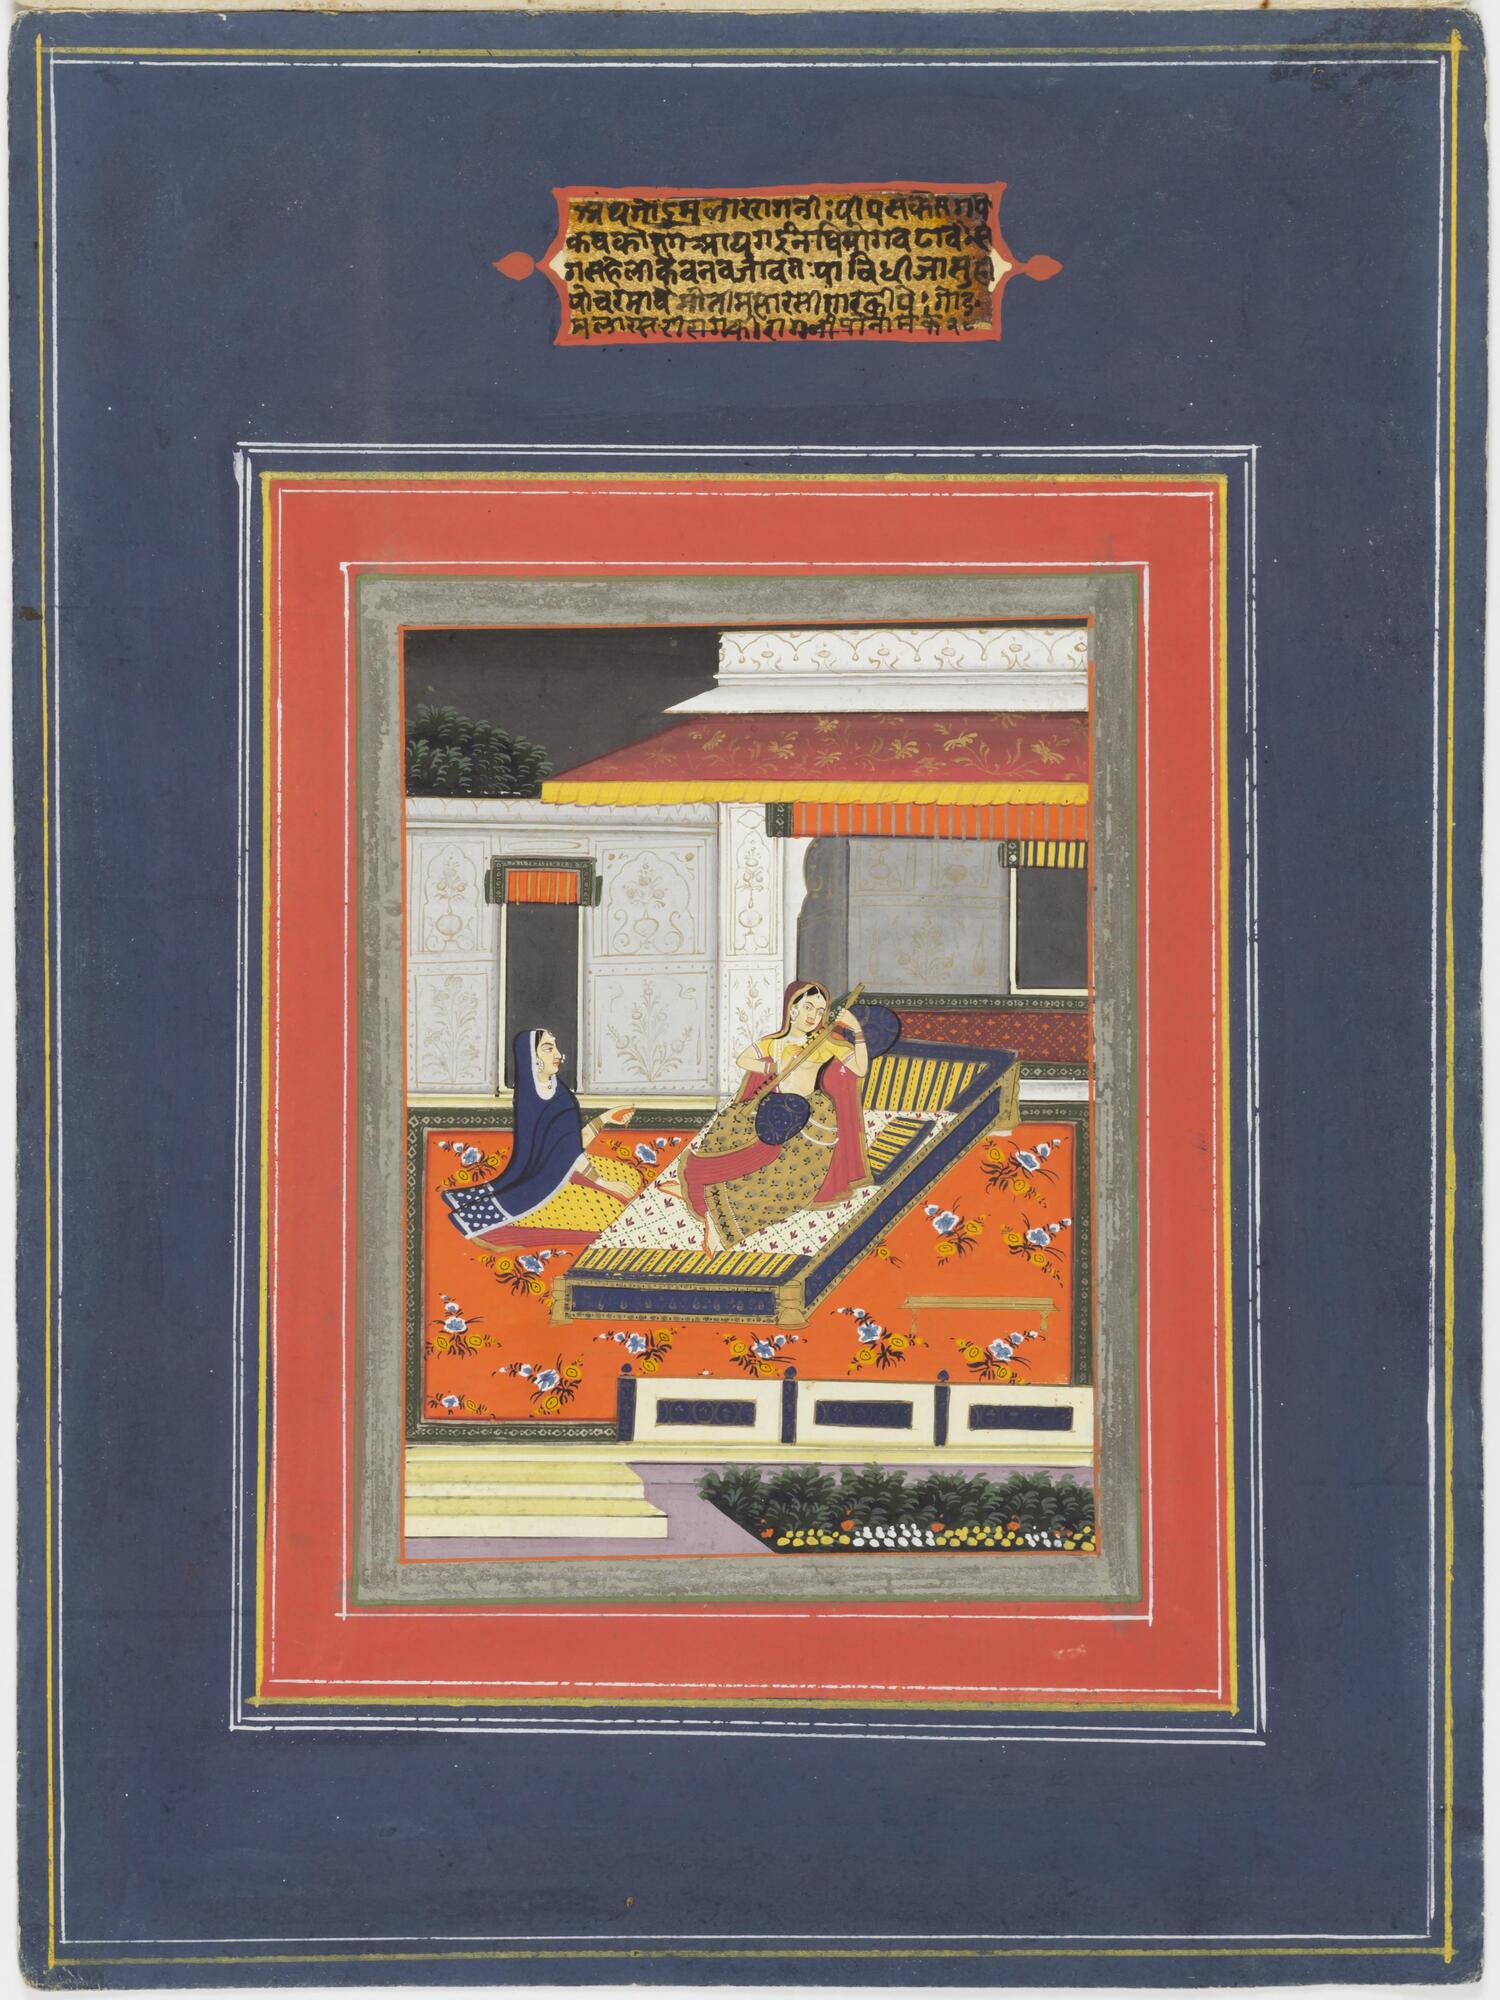 A woman playing a musical instrument is shown sested on a bed in an open-air terrace during nighttime. A pavilion is represented behind her, and a horizontal wall connected to the pavilion, consisting of an opening/ door, extends to the left border of the scene. Another female figure, possibly an attendant, is shown sitting on the floor beside the bed, facing her mistress. A short verse is painted above the depicted scene.